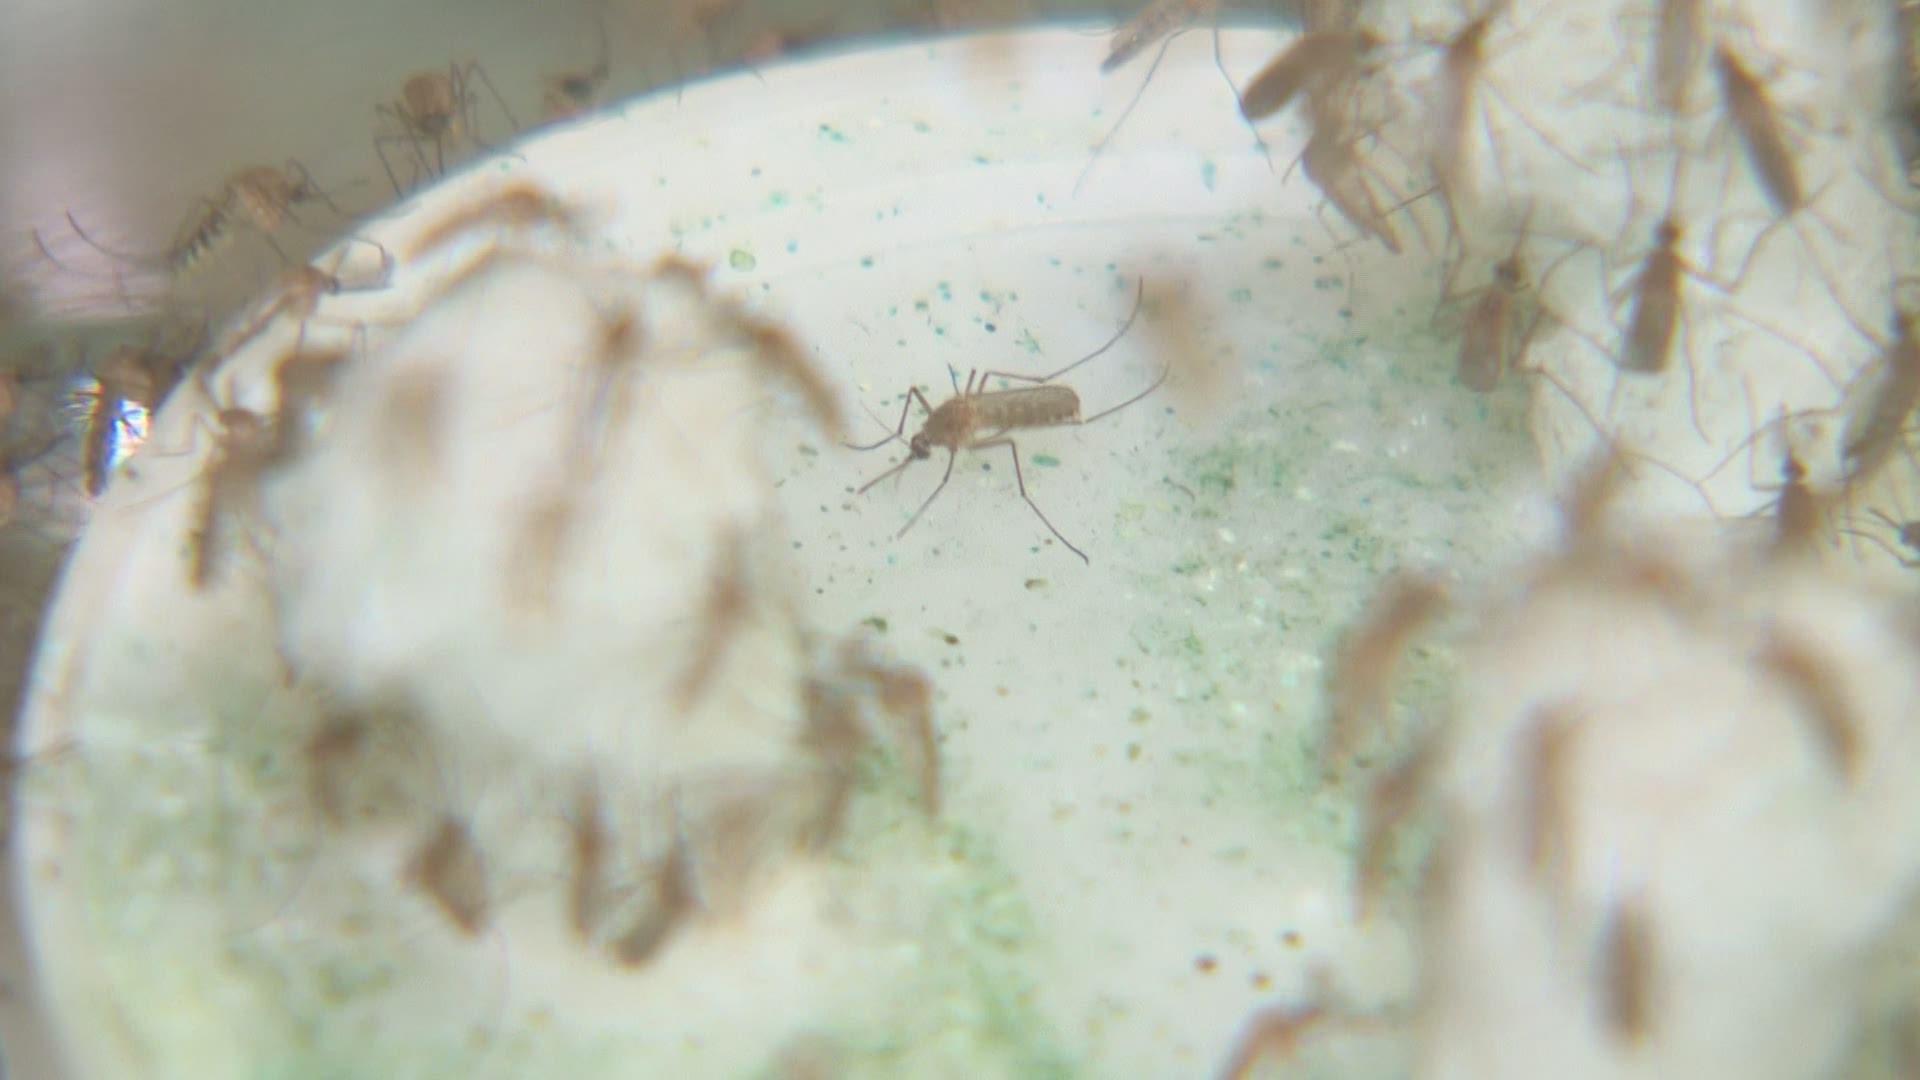 County health officials have confirmed West Nile virus is here, again, in Harris County.